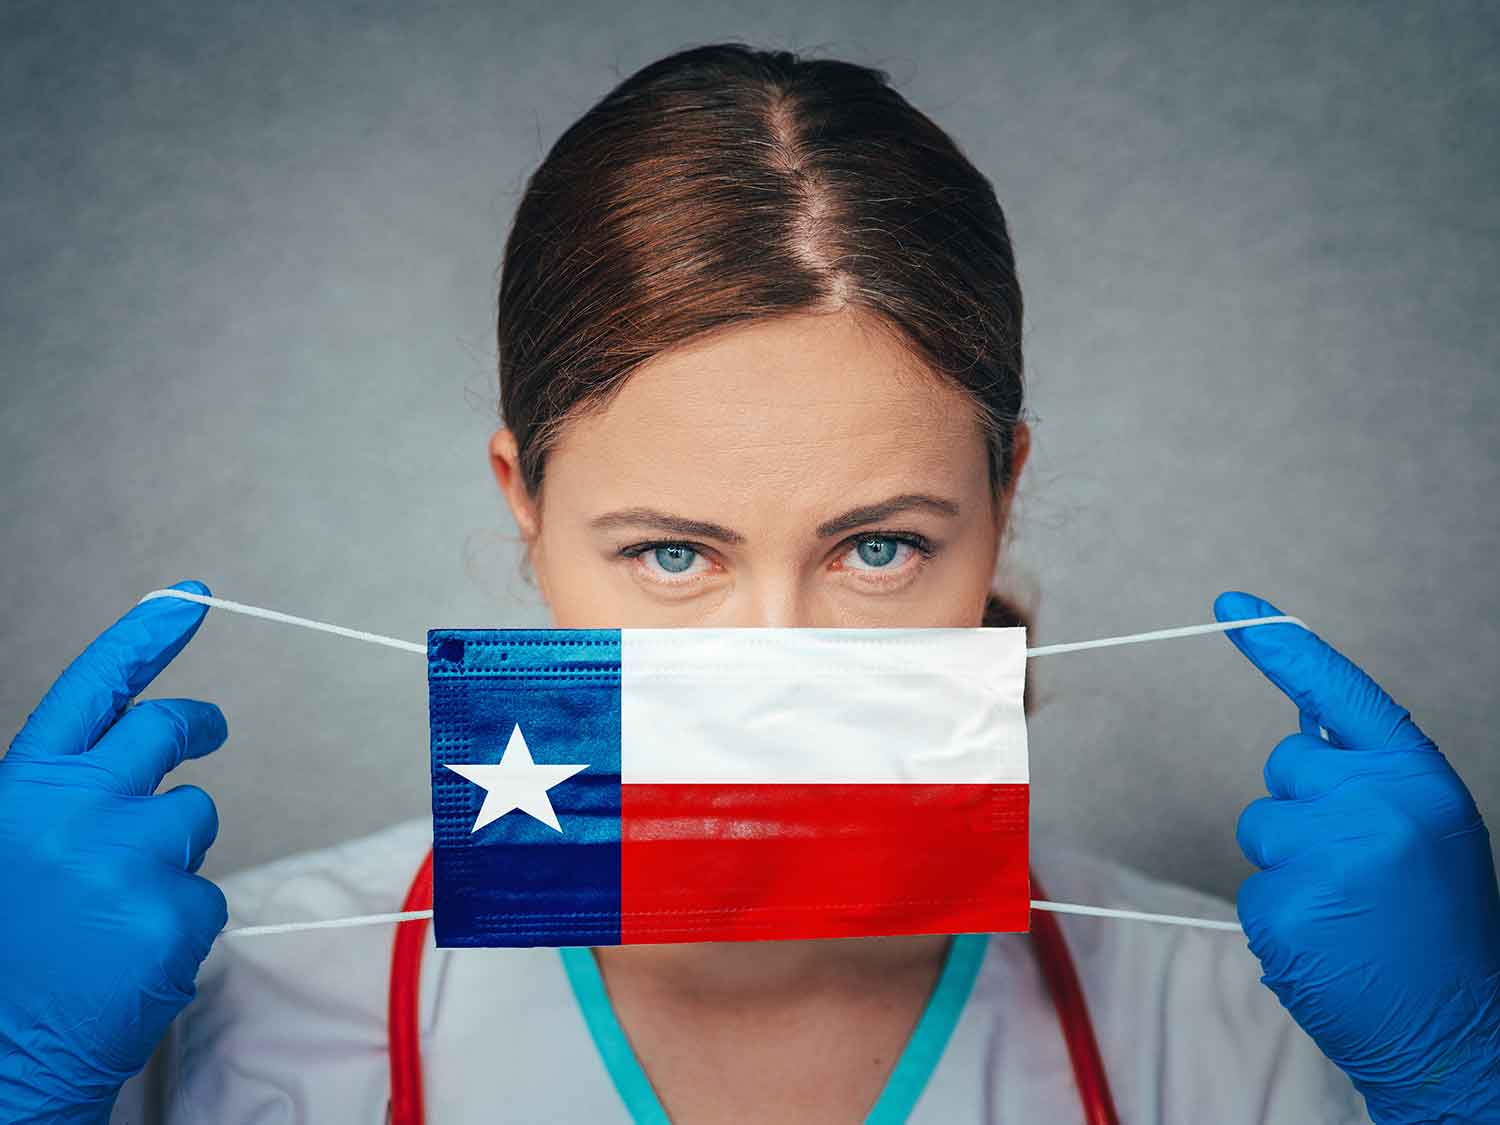 A Texas Doctor With Comprehensive Liability Insurance Holding A Mask With The State Flag Over Her Face